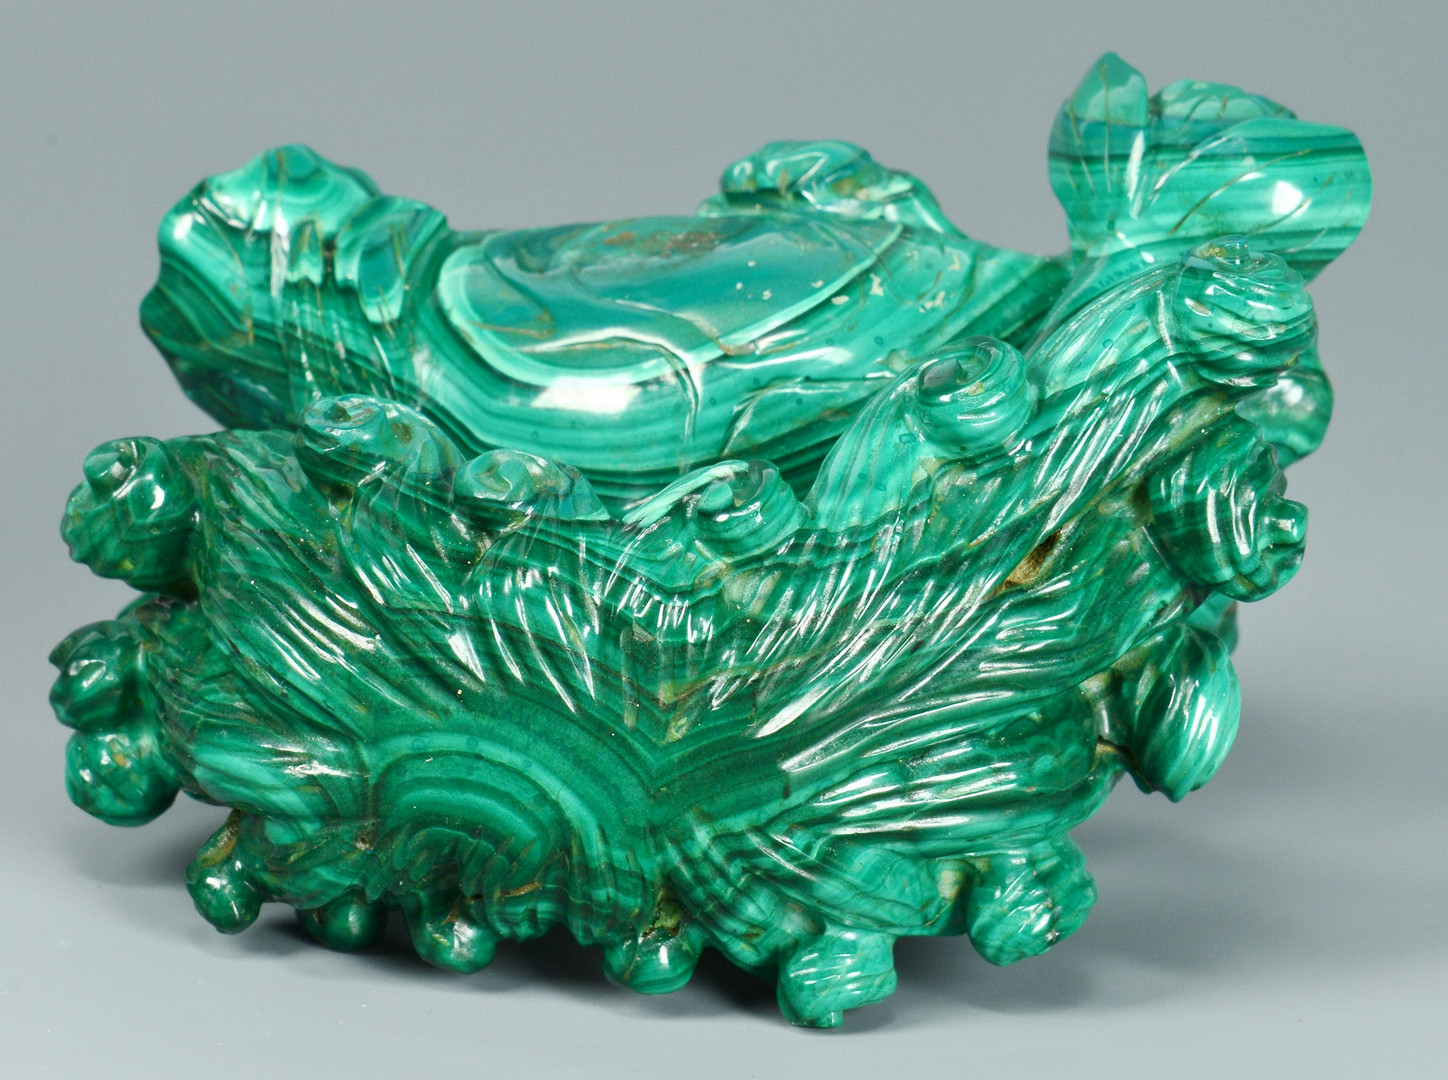 Lot 20: Malachite Libation Cup w/ Frog & Floral Carving